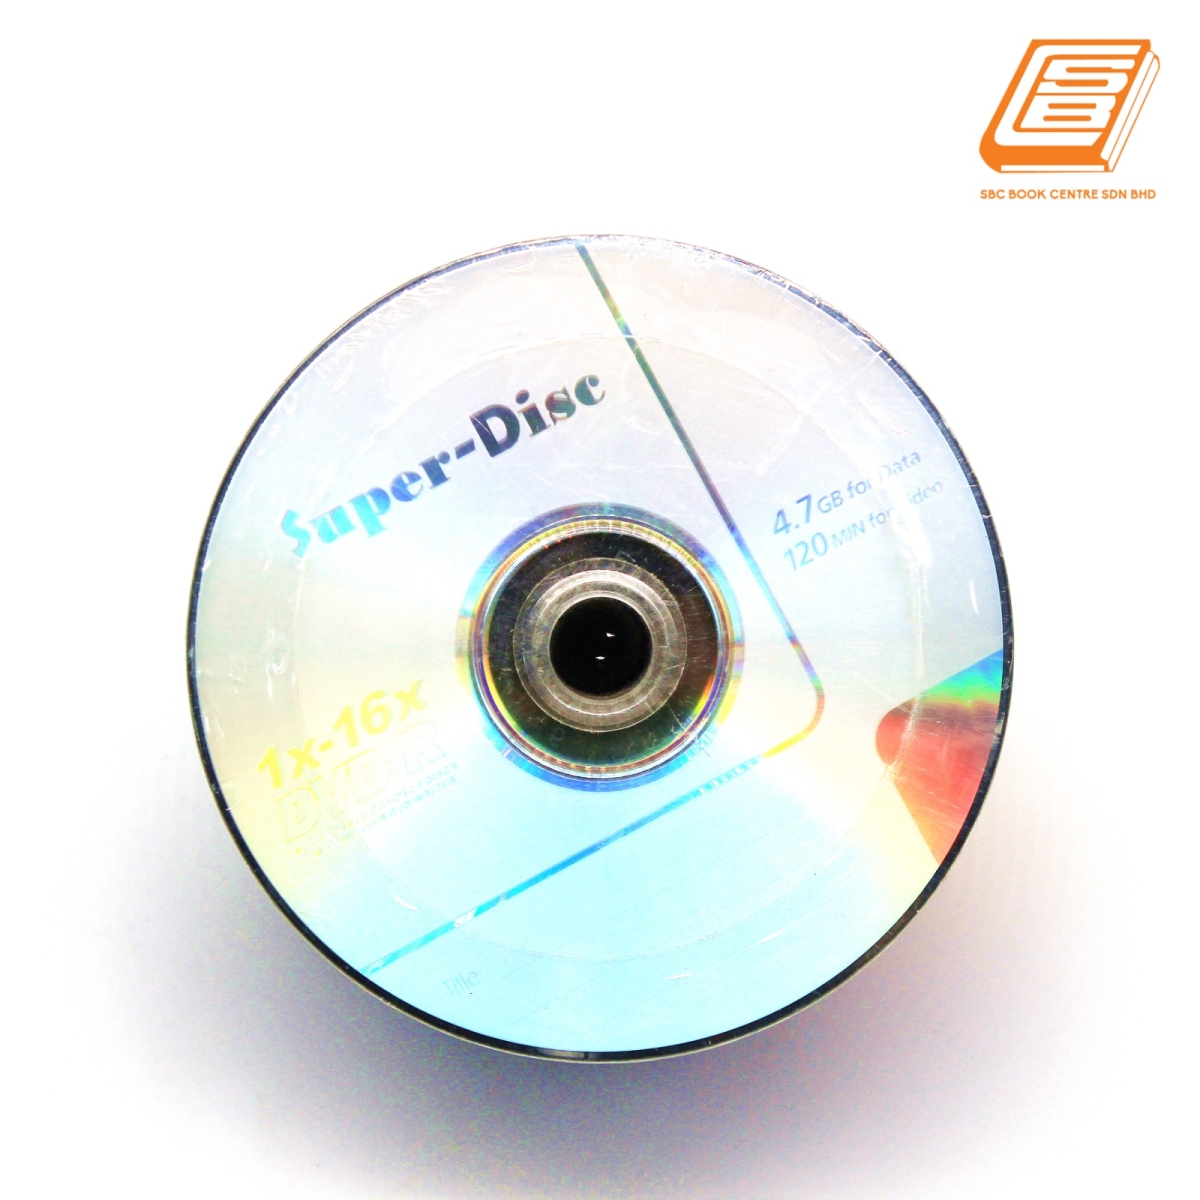 Super-Disc - DVD-R Blank CD / DVD IT Product Stationery Johor